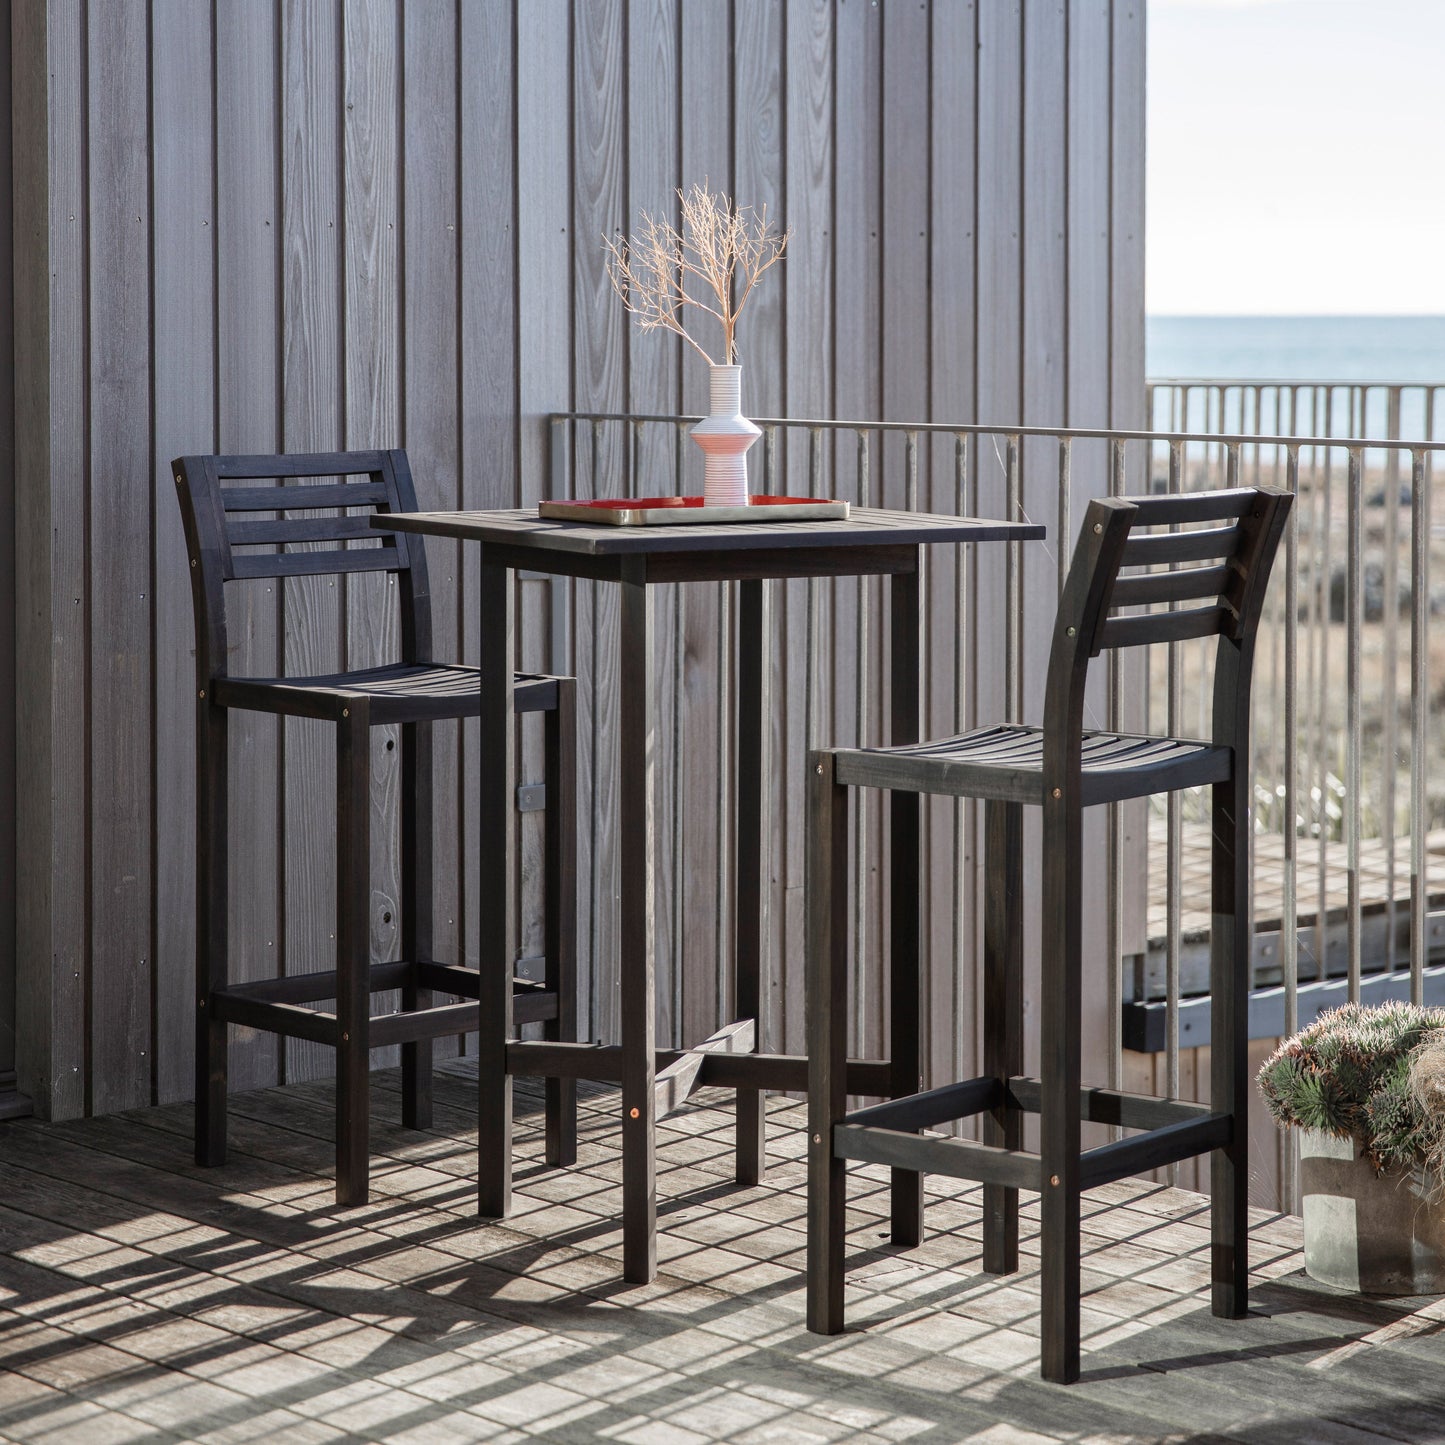 Alfrington Bar Stools Black (2pk) by Kikiathome.co.uk atop a balcony, enhancing the interior decor and providing home furniture with a view of the ocean.